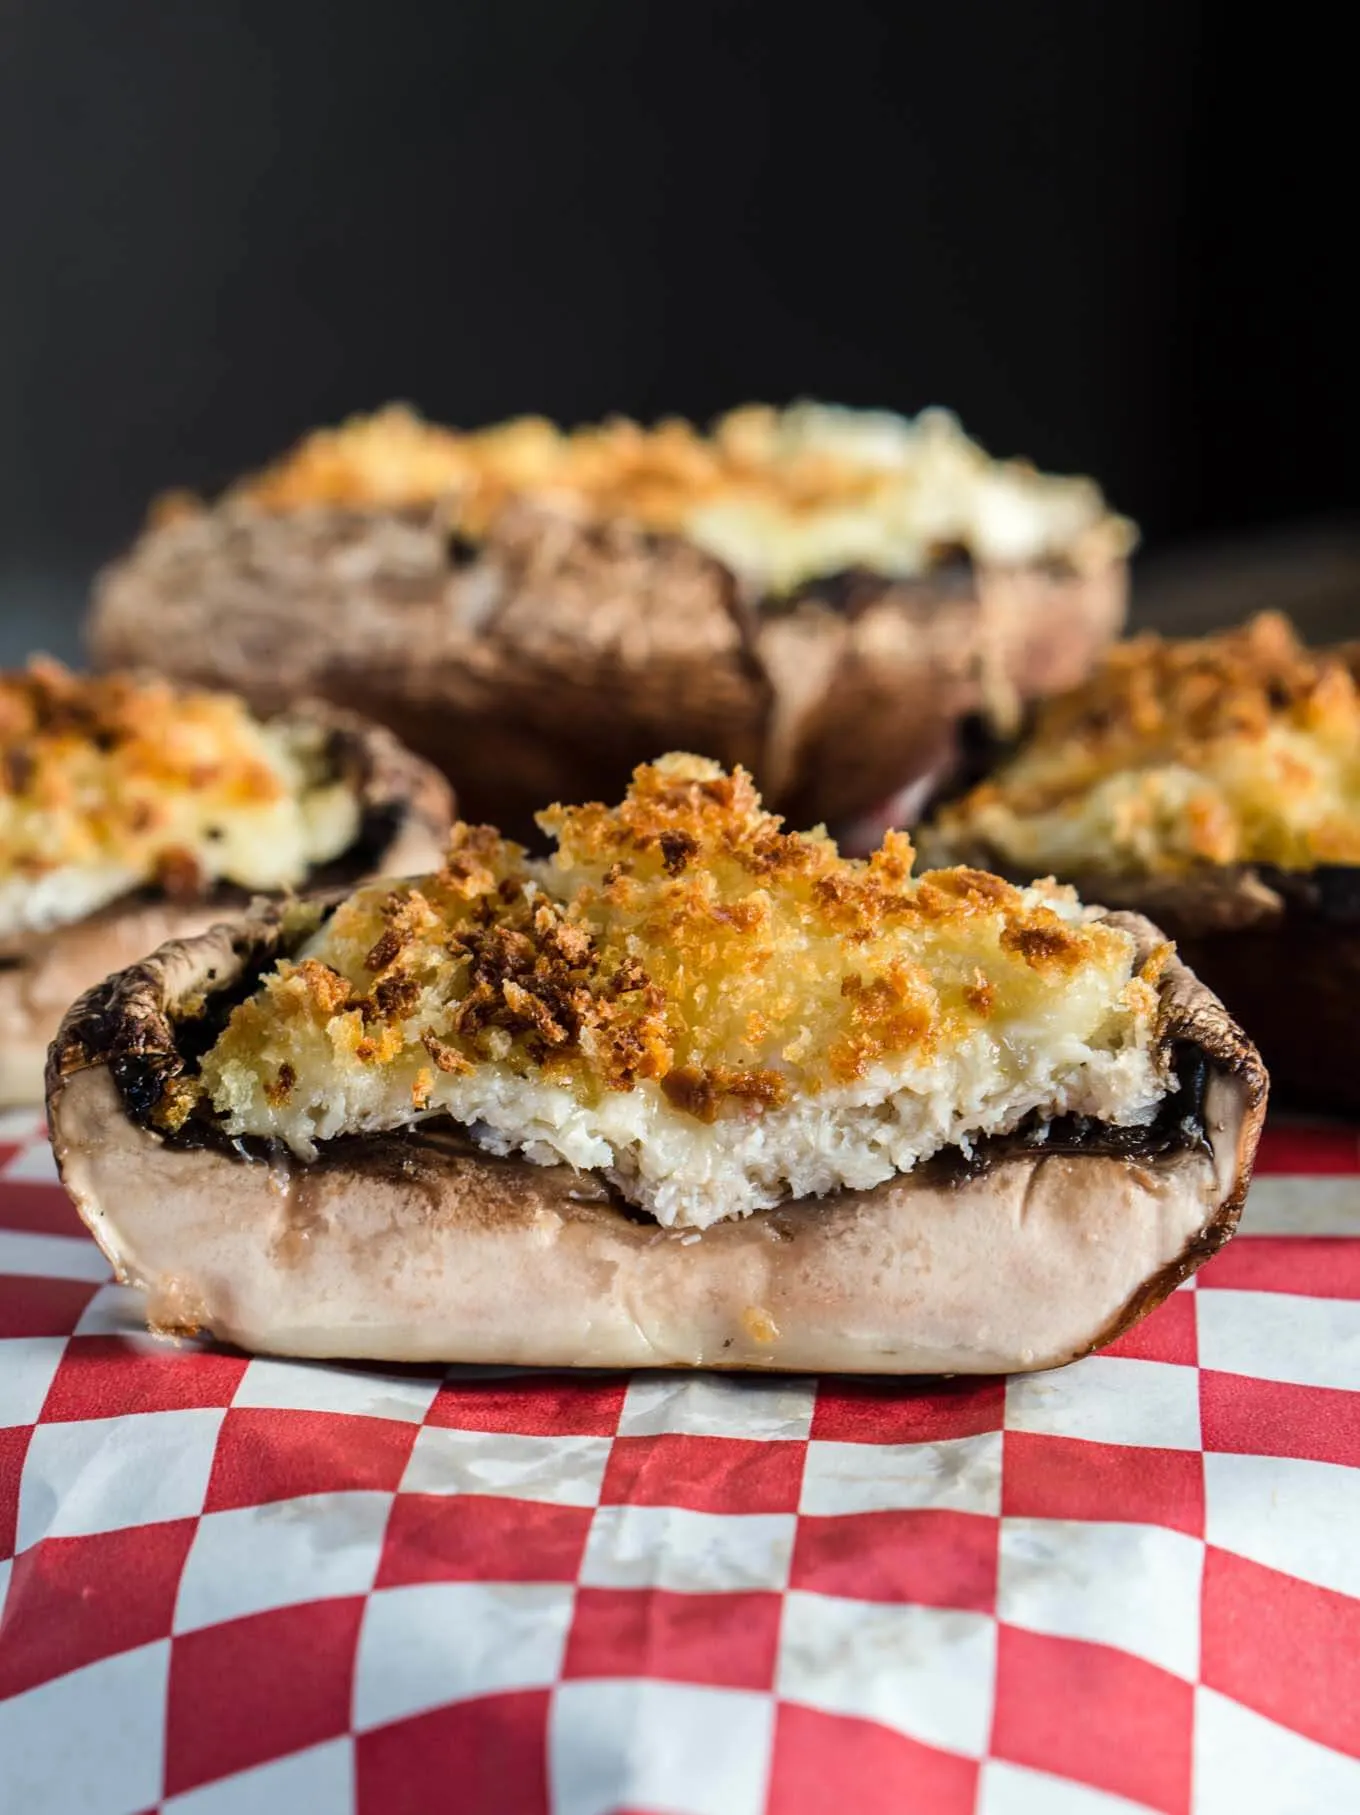 Crab stuffed portabello mushroom cut in half with more stuffed mushrooms sitting in the back over a red checked napkin.